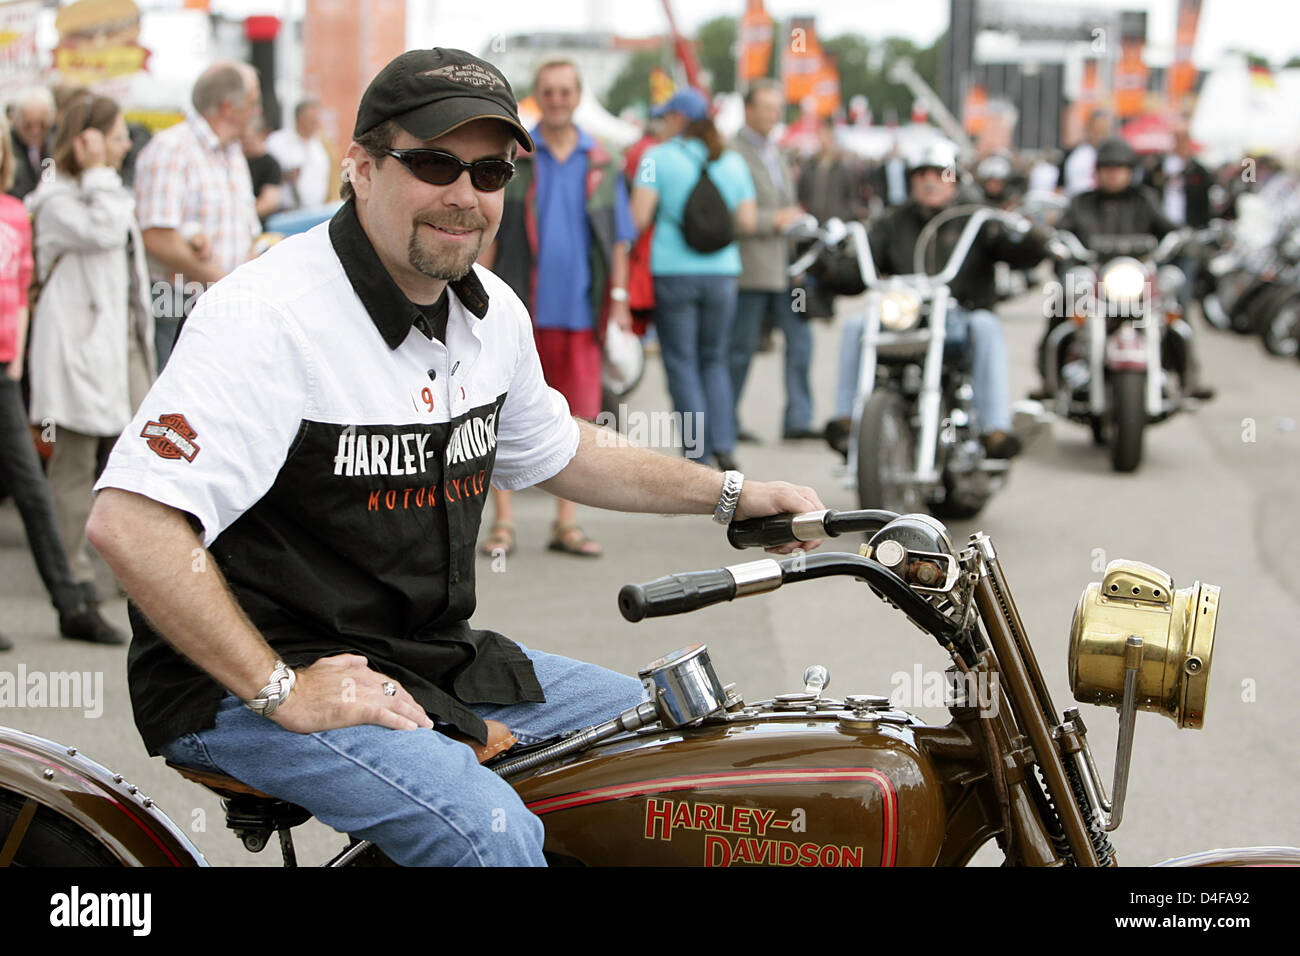 Bill Davidson, great-grandson of 'Harley-Davidson' company founder William  A. Davidson, is pictured with a